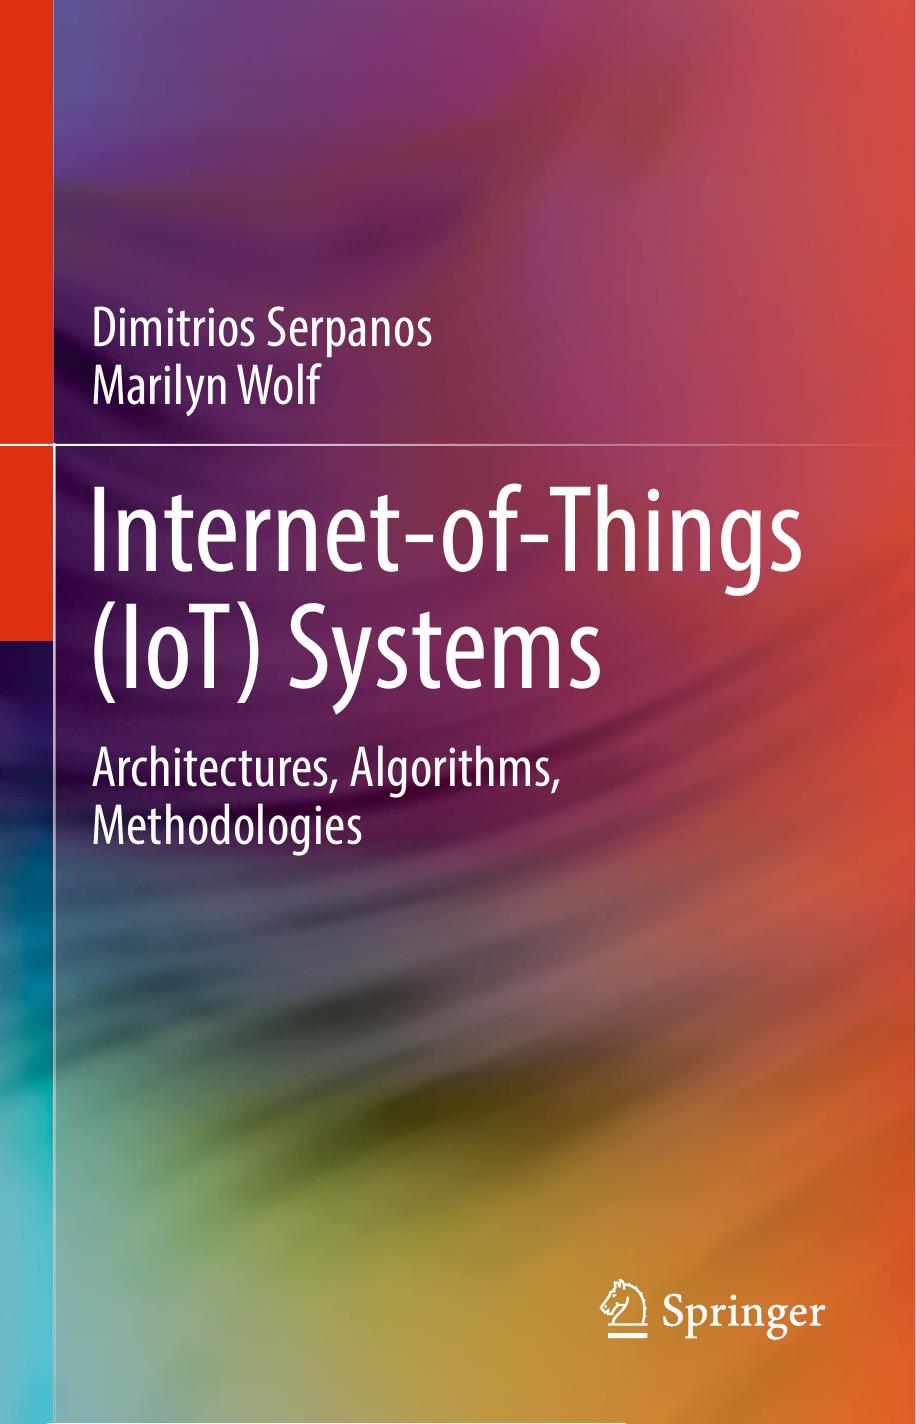 Internet-Of-Things (IoT) Systems: Architectures, Algorithms, Methodologies